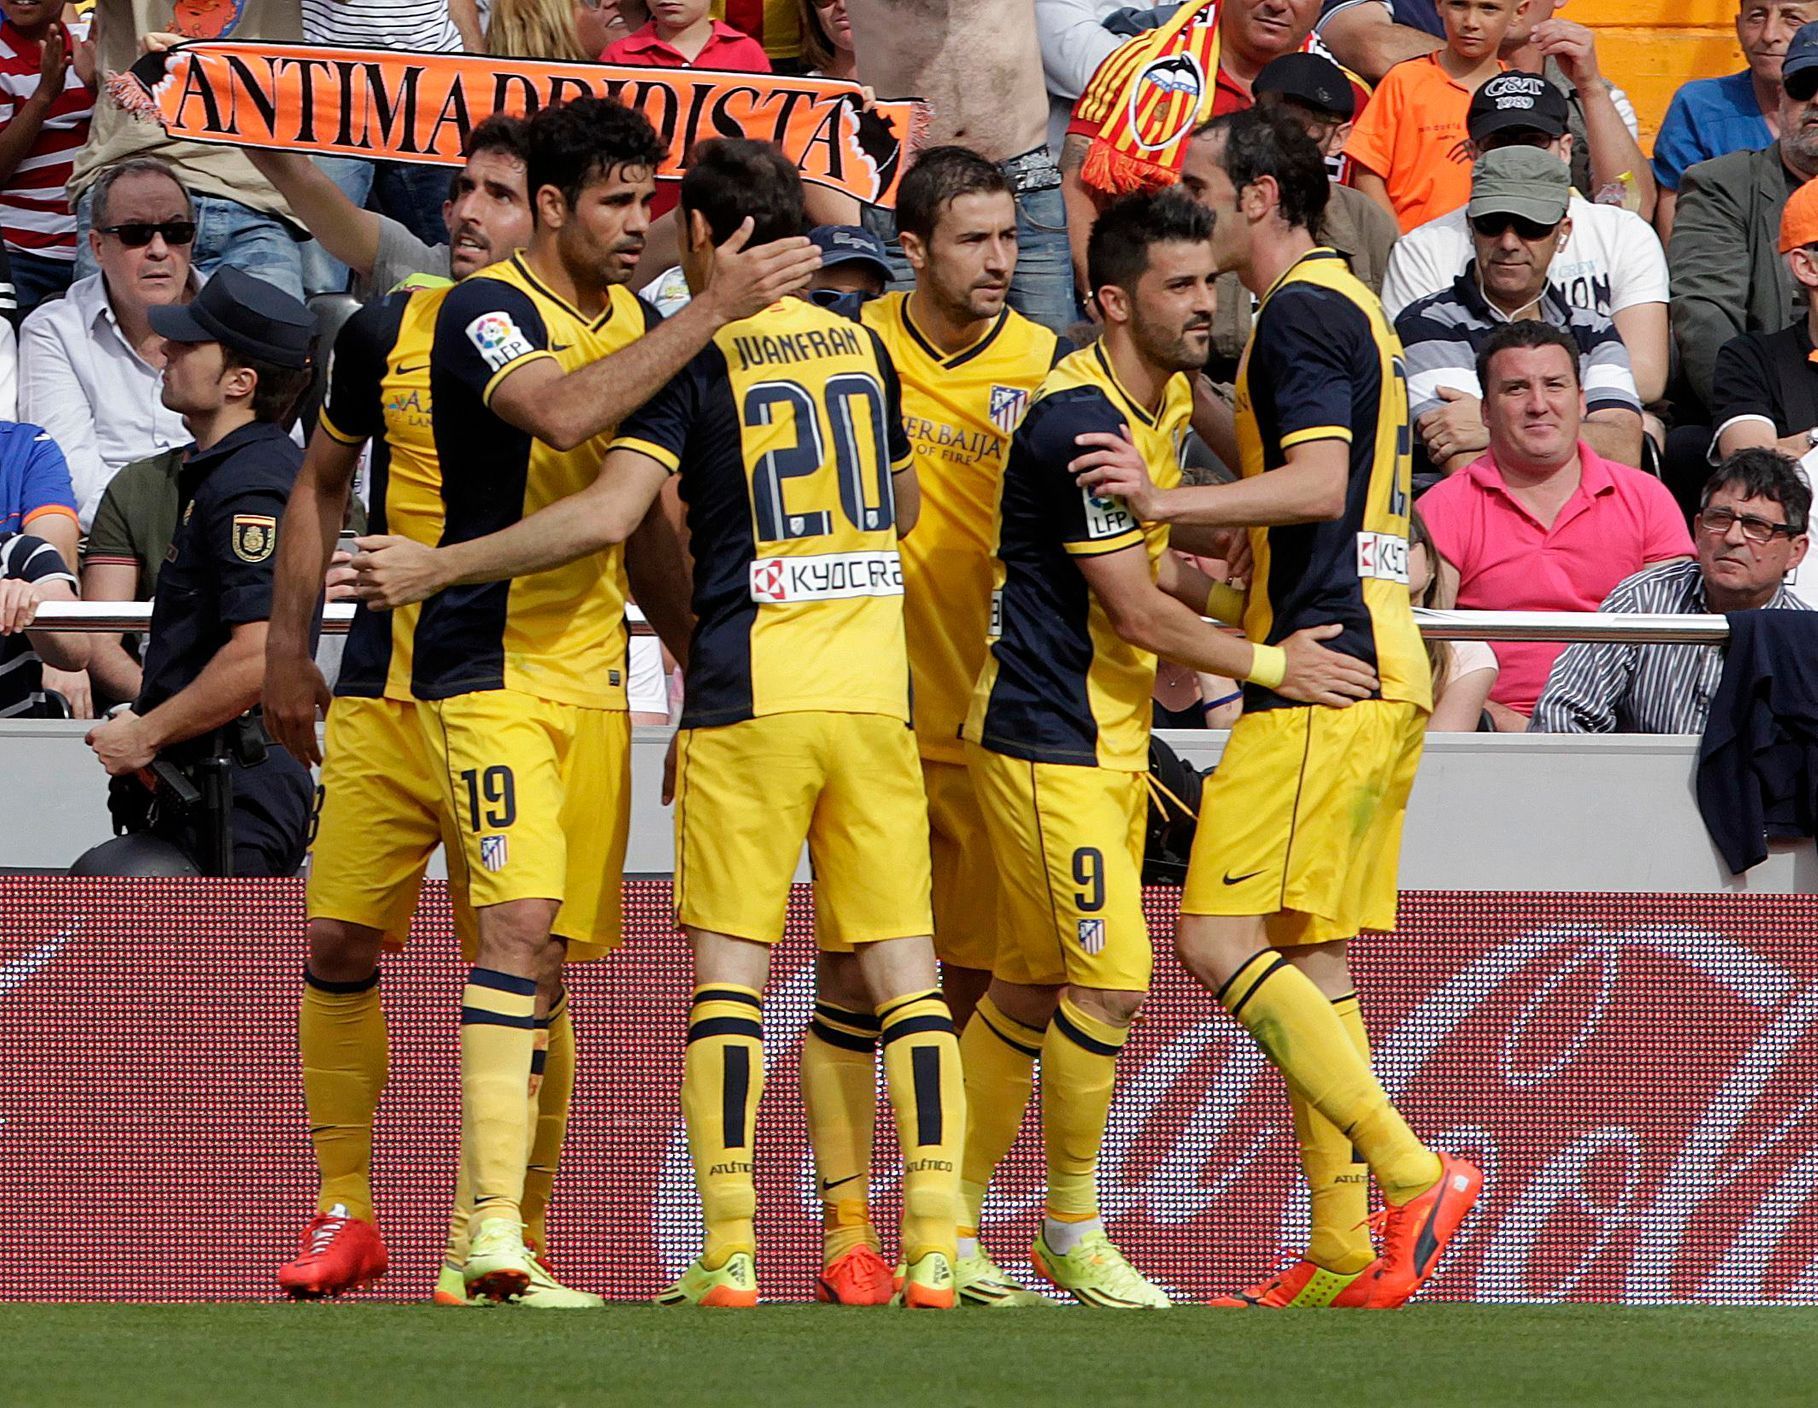 Atletico Madrid's players celebrate after they scored against Valencia during their Spanish first division soccer match in Valencia